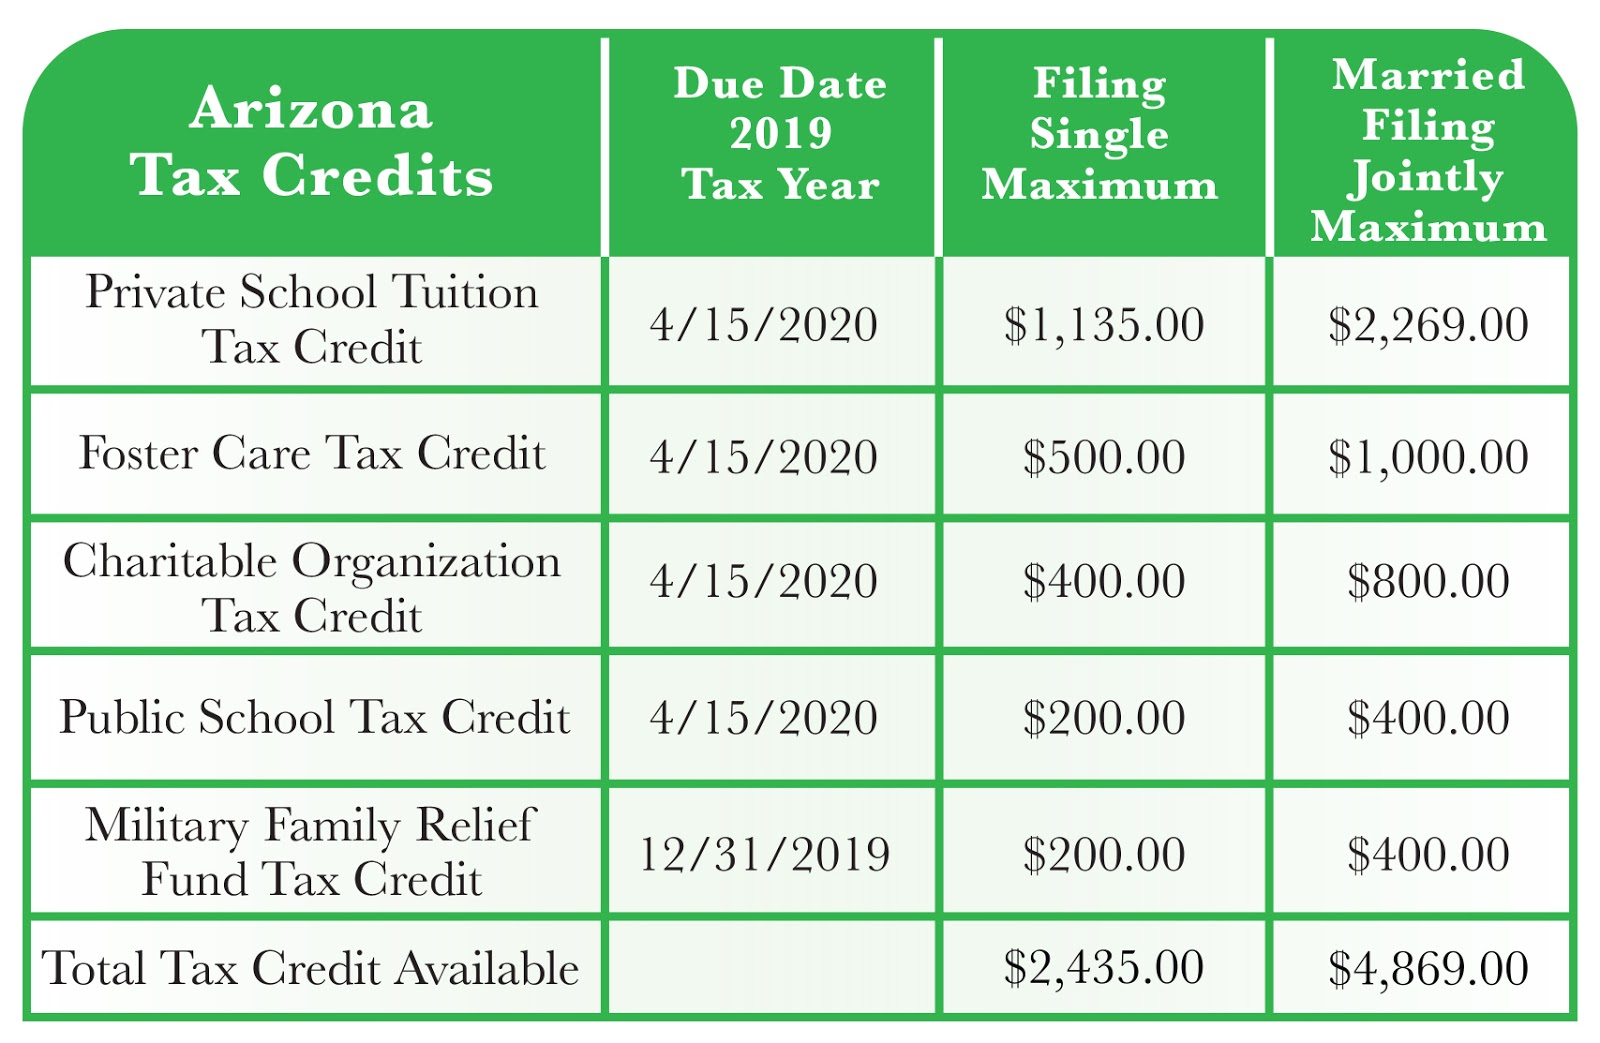 IBE Scholarships Arizona Offers Five Different Tax Credits